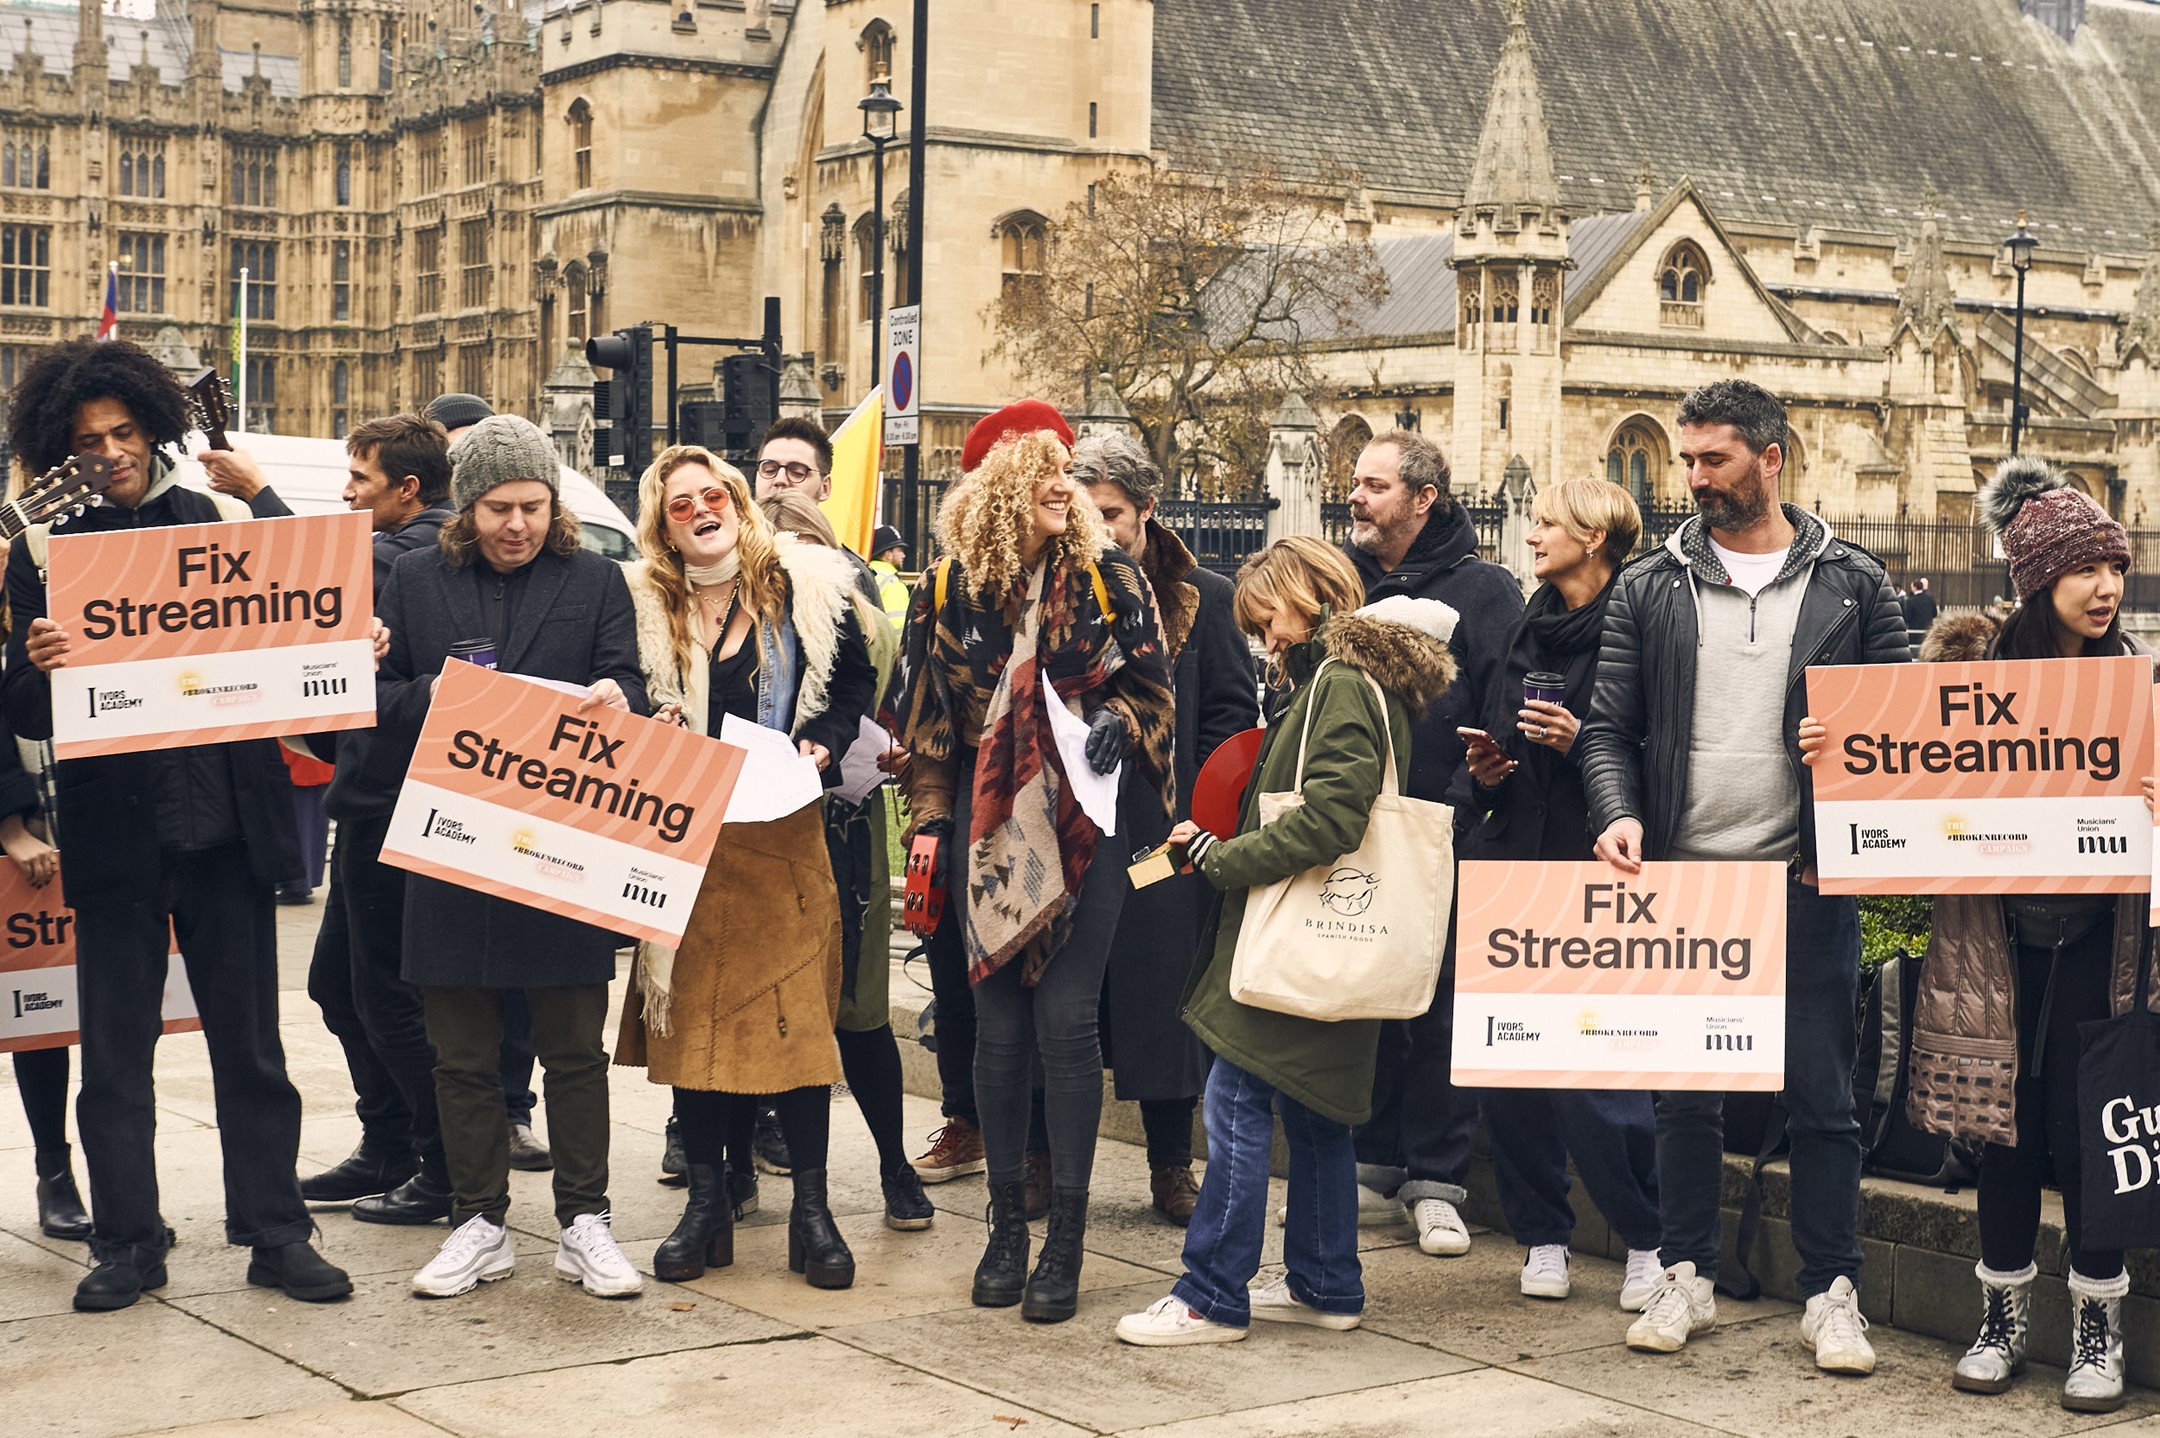 Photograph of a large group of people standing outside the houses of parliament, some appear to be singing and some are holding placards reading 